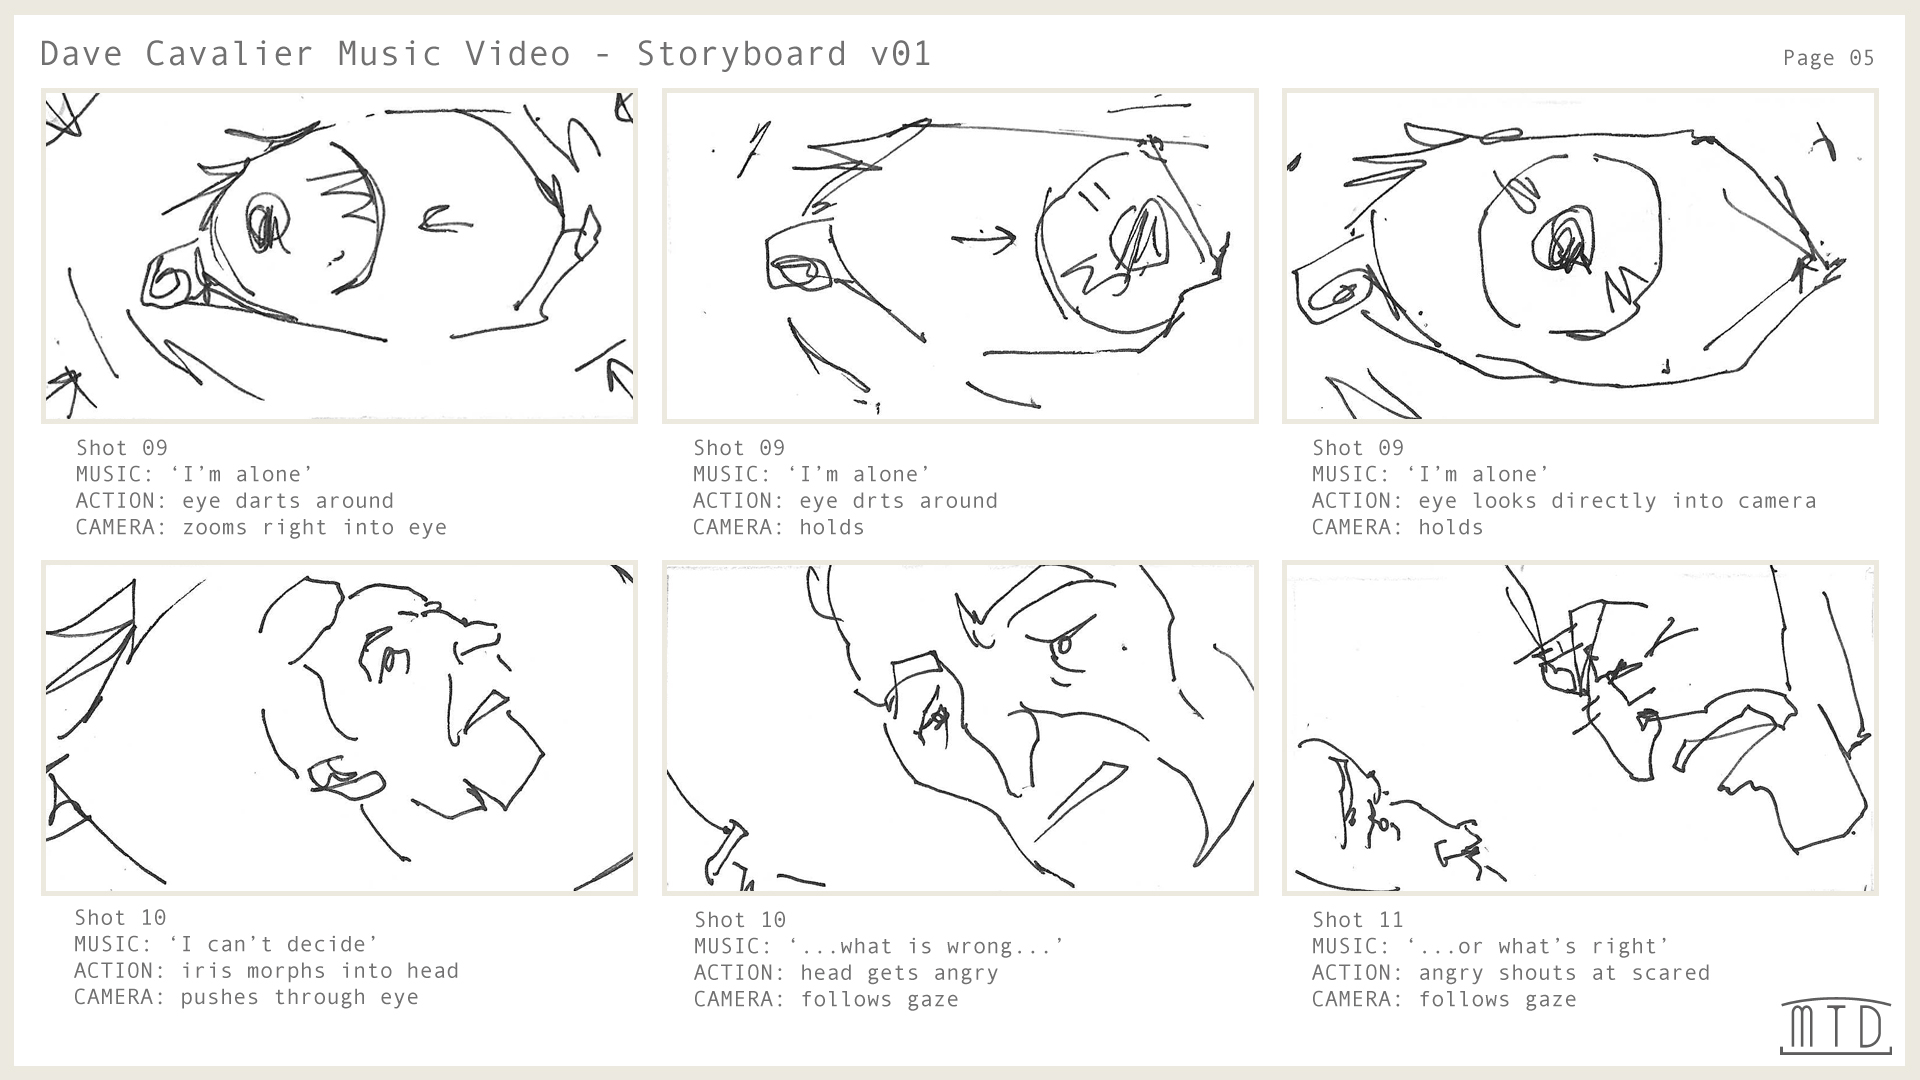 The Hold storyboard page 5